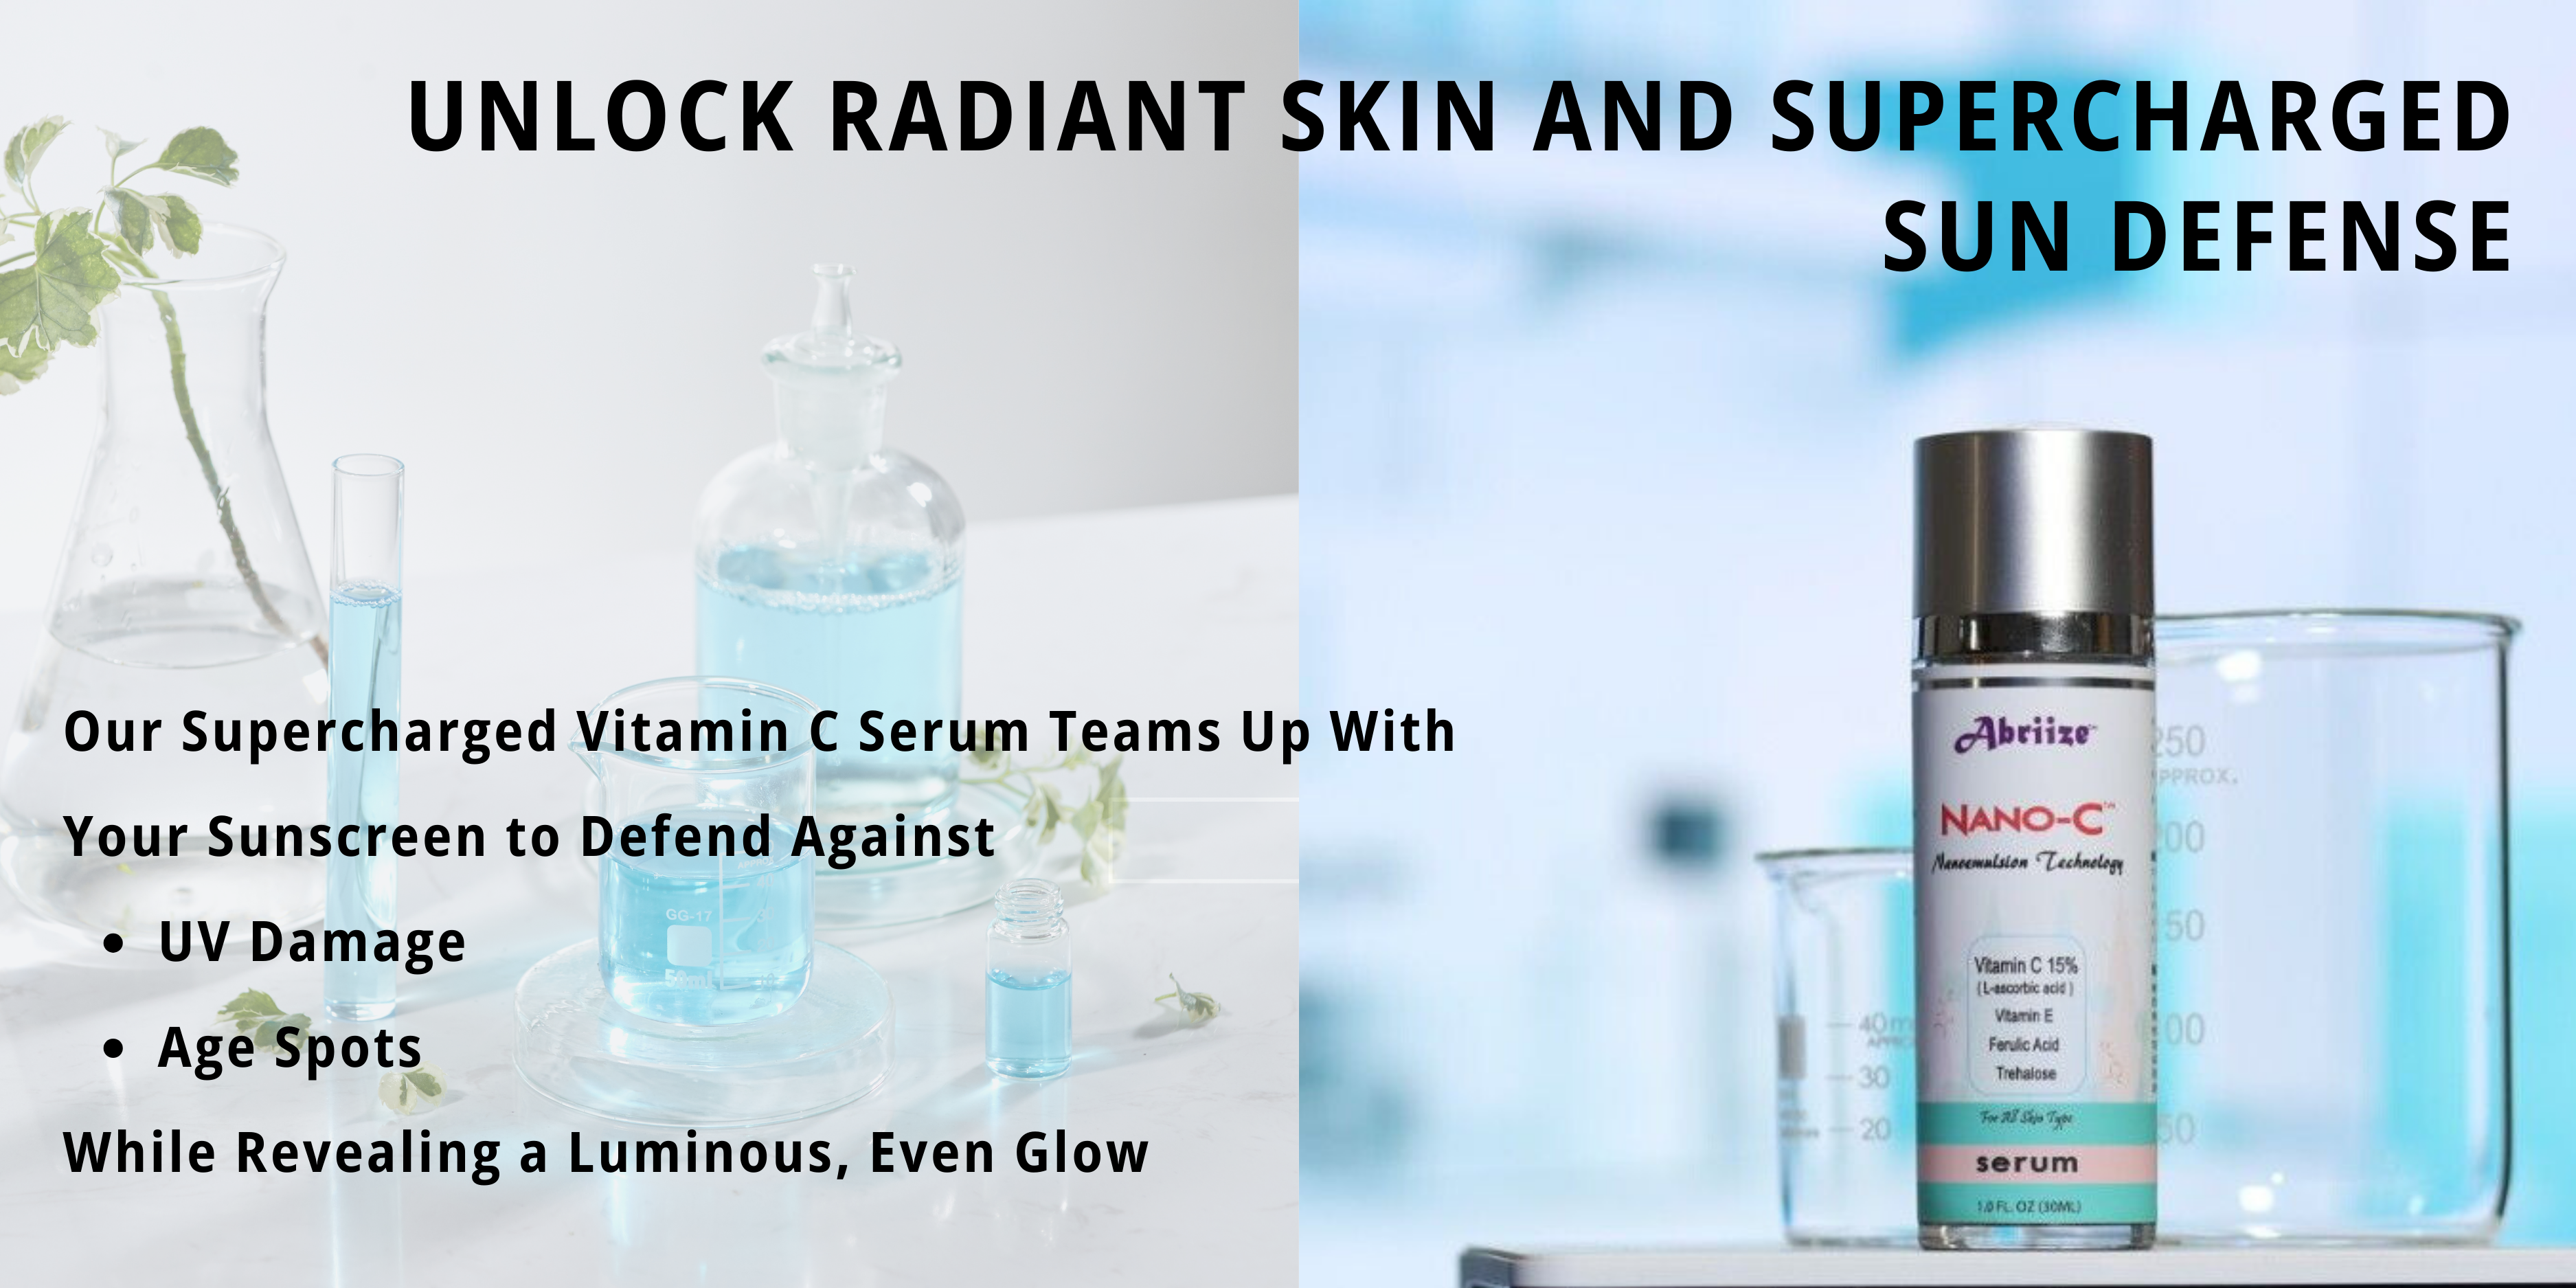 Banner image with Nano-C serum bottle and various glassware with blue clear liquids and green stems. Text "Unlock Radiant Skin and Supercharged Sun Defense", protecting from UV damage, age spots, while revealing a luminous, even glow.